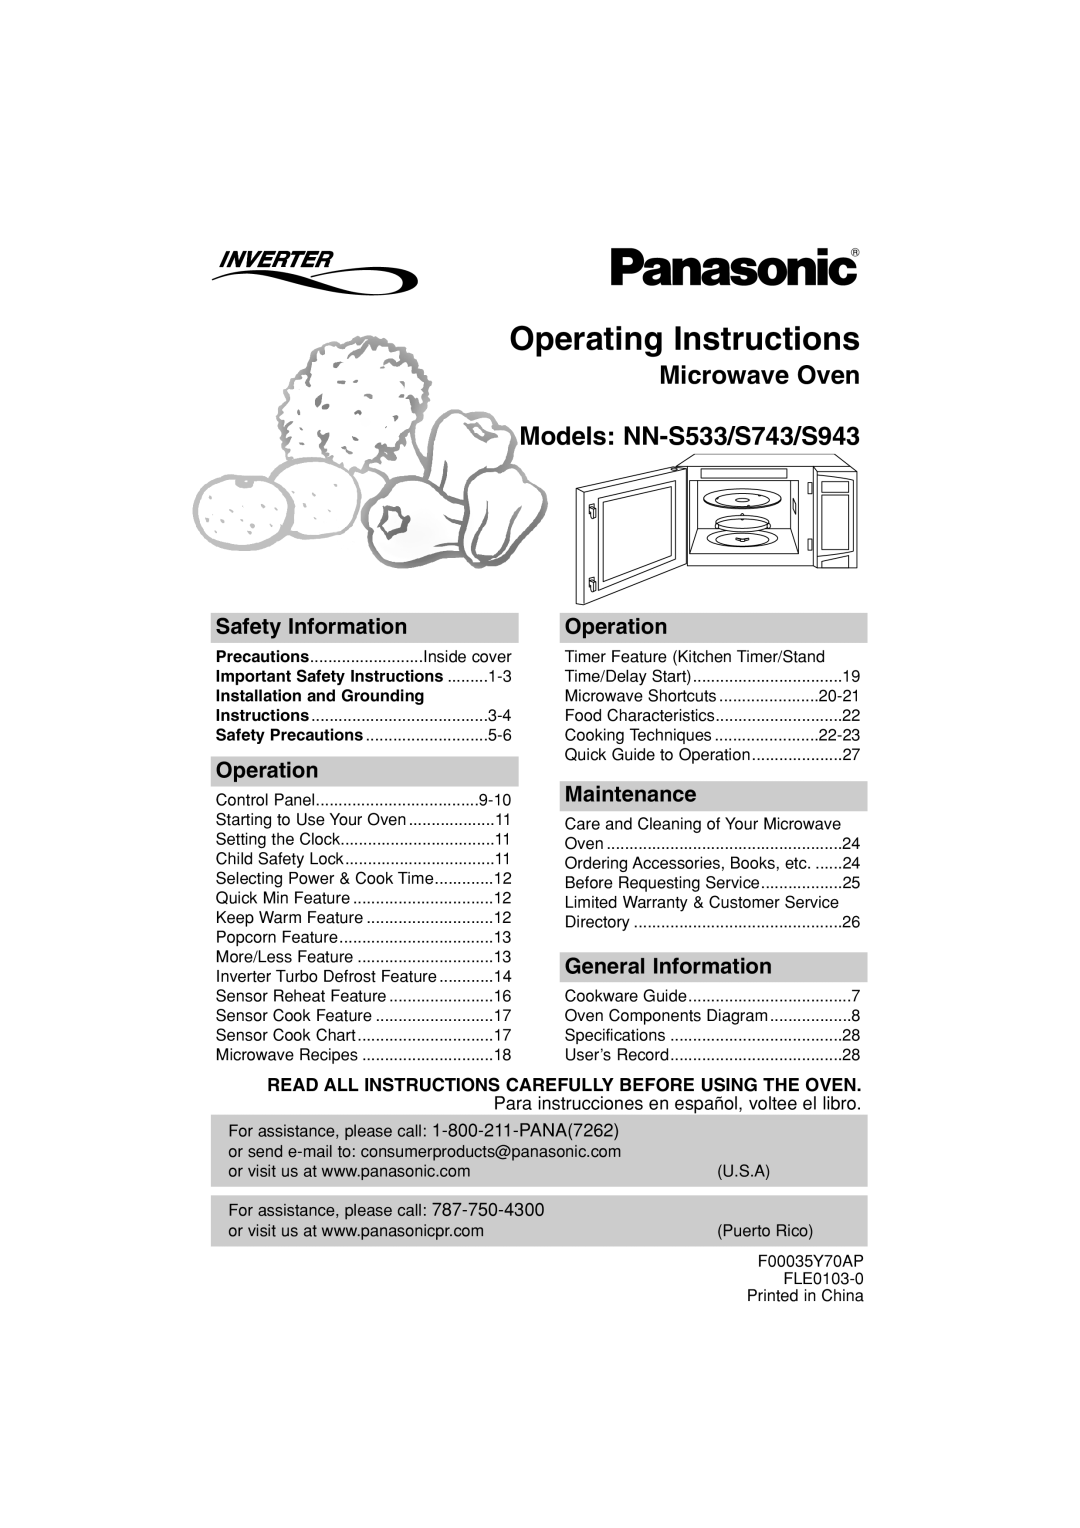 Panasonic NN-S943 important safety instructions Operating Instructions, Microwave Oven Models NN-S533/S743/S943, Operation 